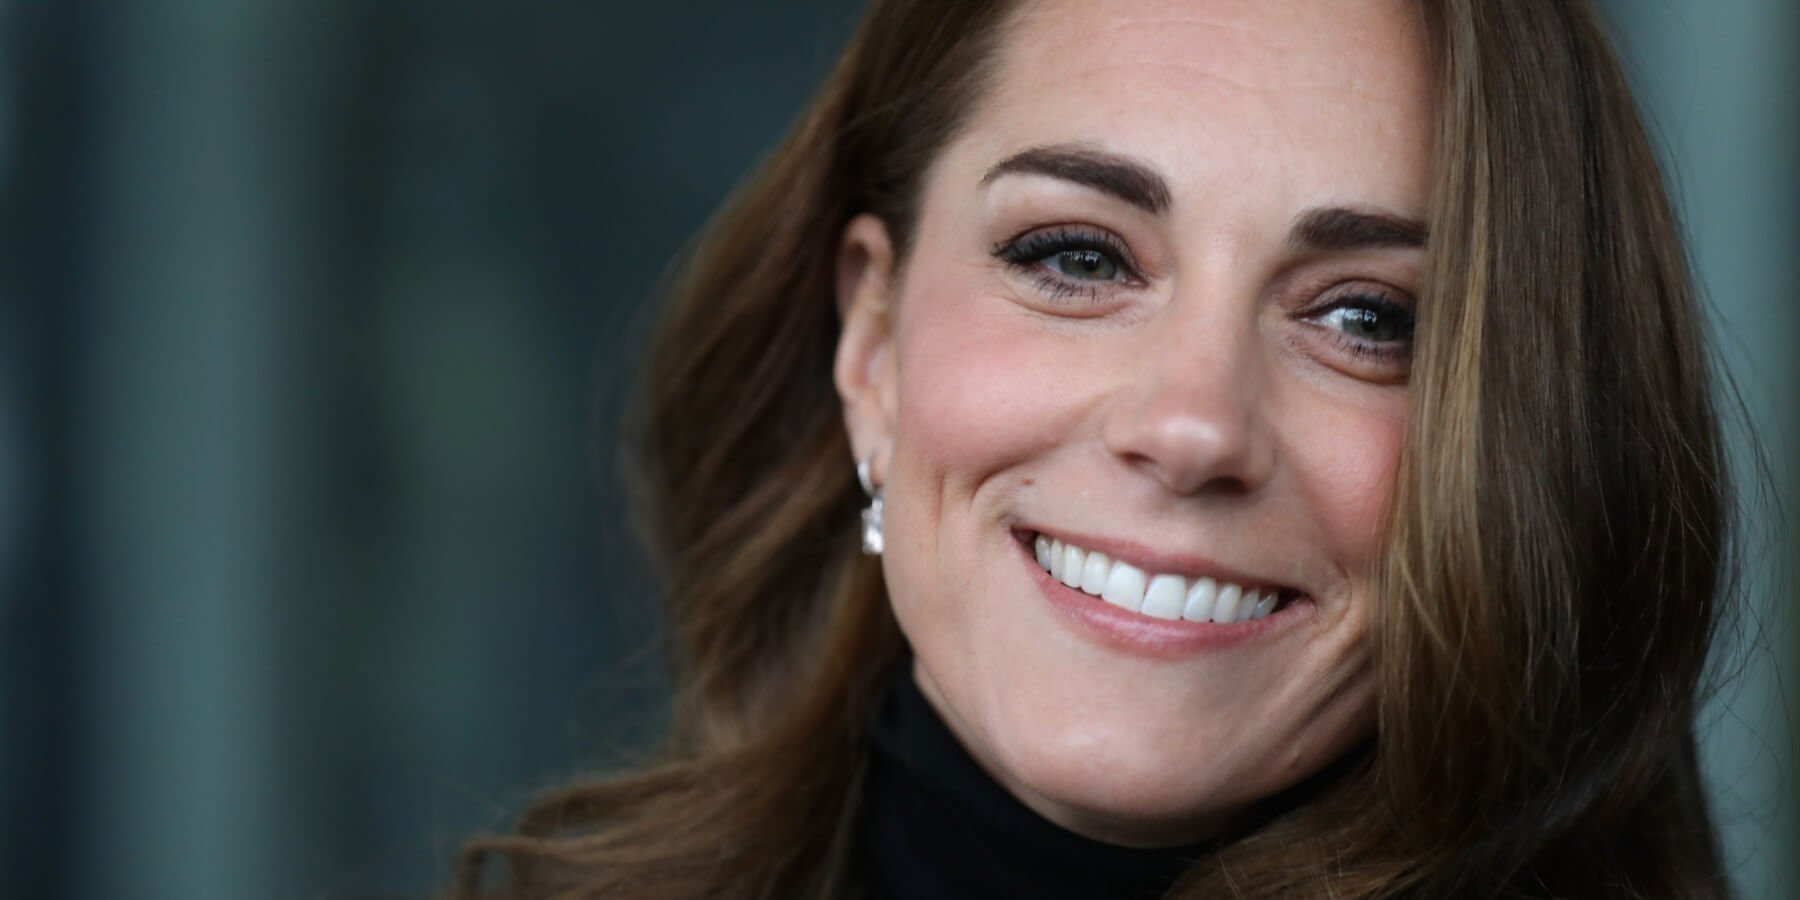 Kate Middleton photographed in 2018 in London, England